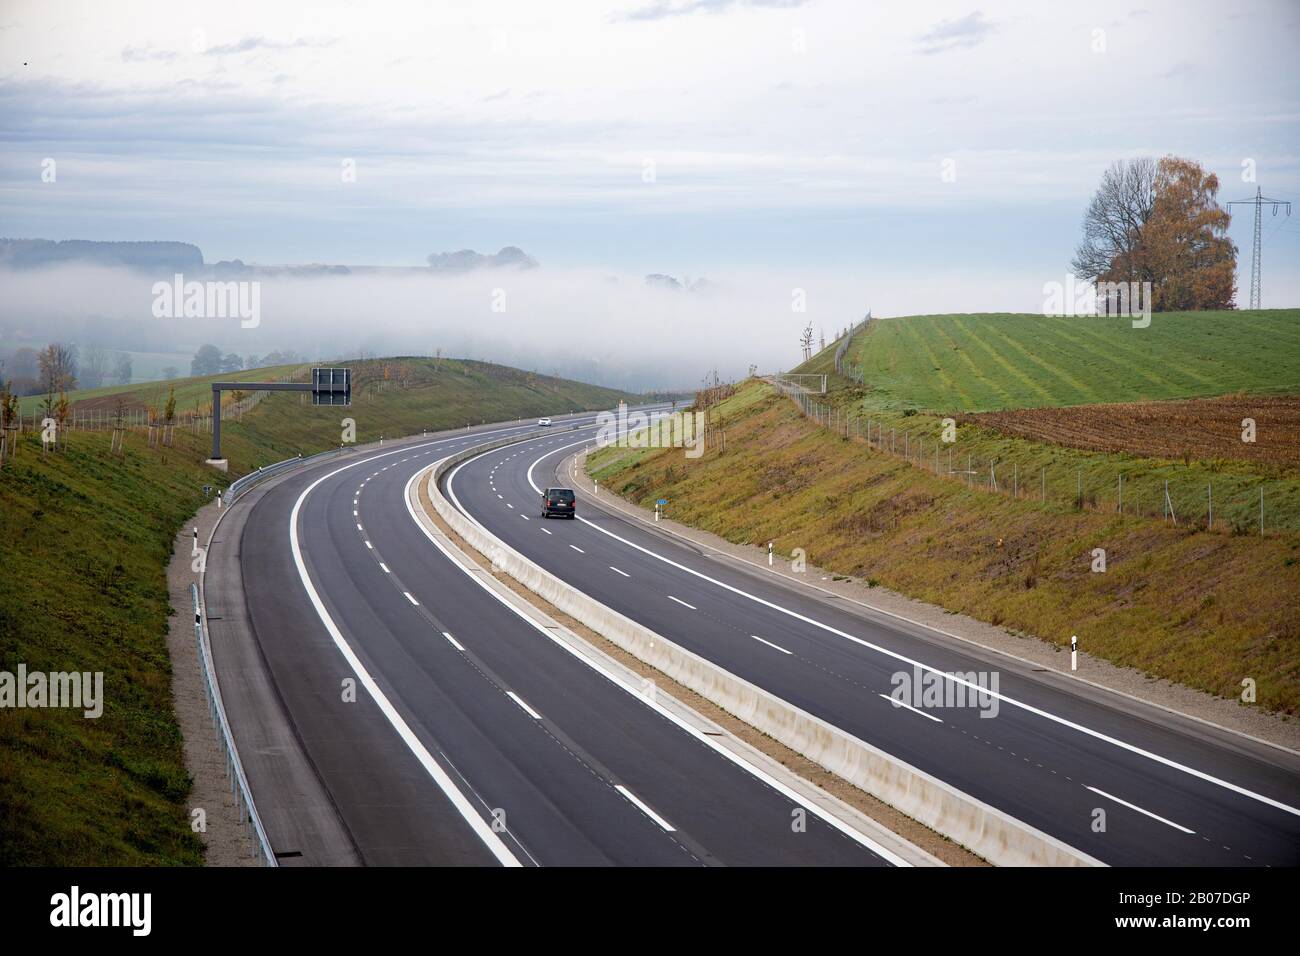 atmospheric inversion, fog bank on the motorway, danger caused by suddenly appearing fog, Germany, Bavaria, Autobahn A 94 Stock Photo